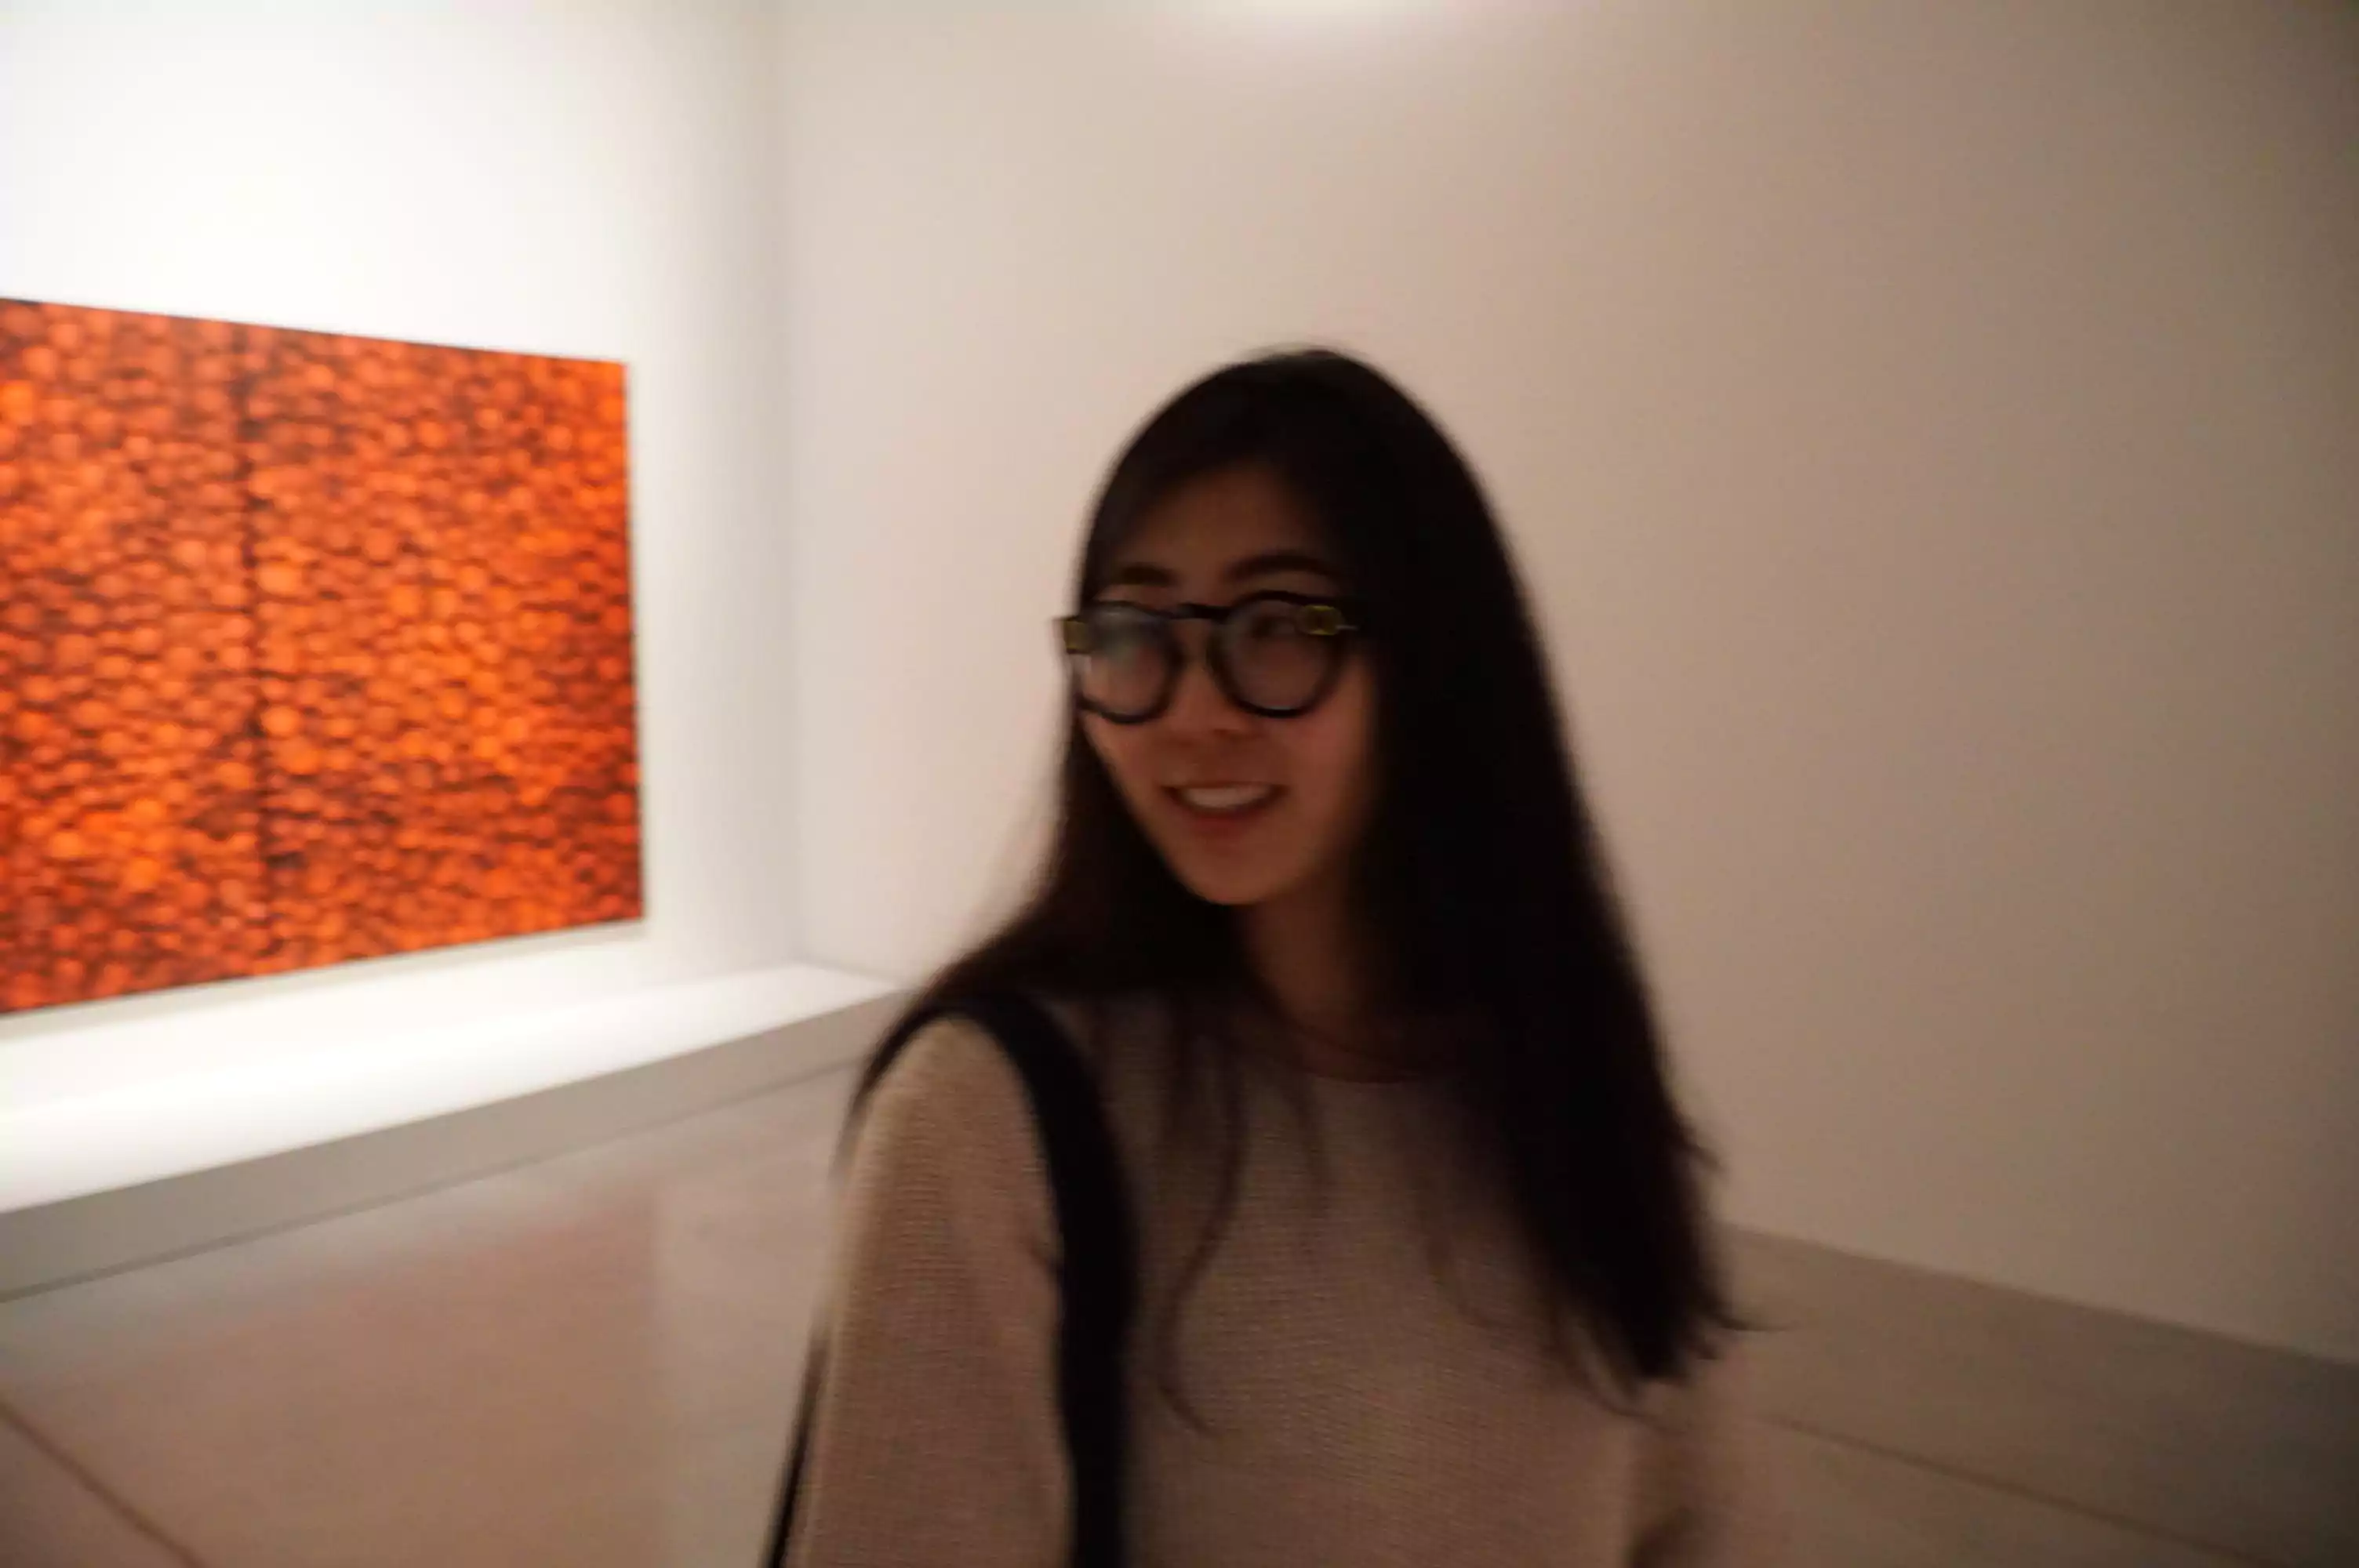 Blurry image of a girl wearing Snapchat Spectacles with the sunglass lenses replaced with prescription ones, looking off from the camera in an artistic way